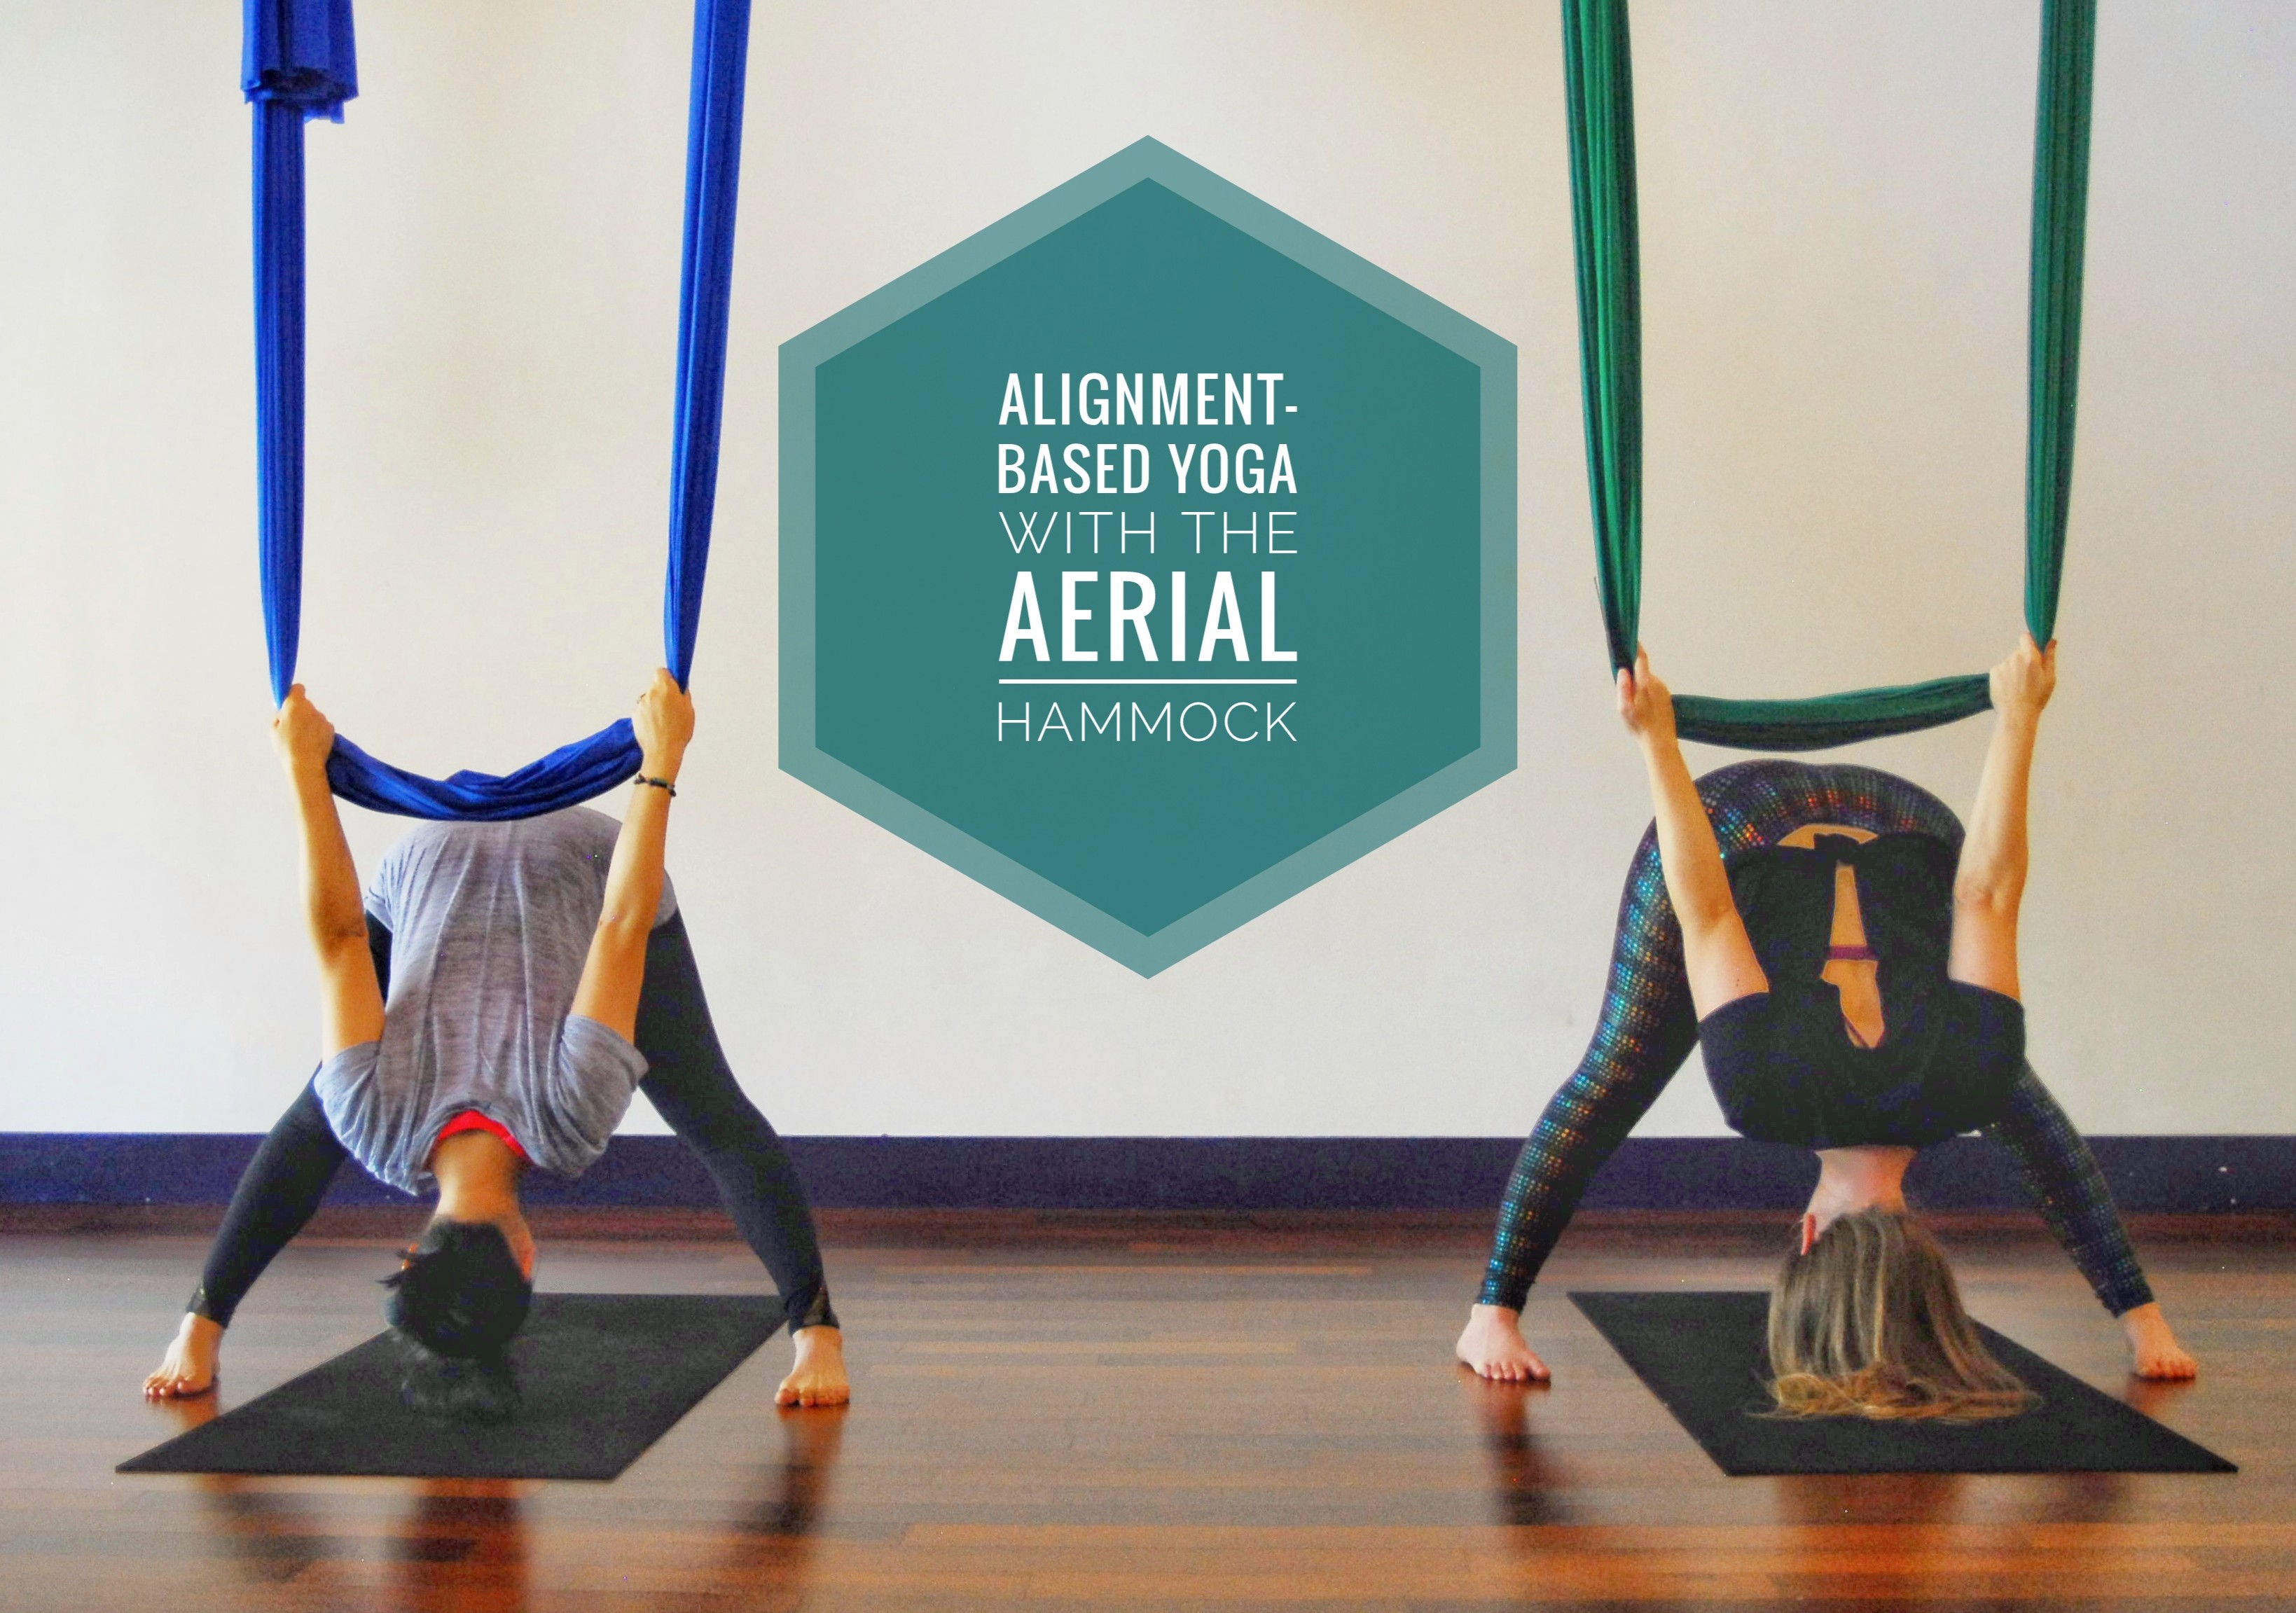 Alignment-based Yoga with the Aerial Hammock